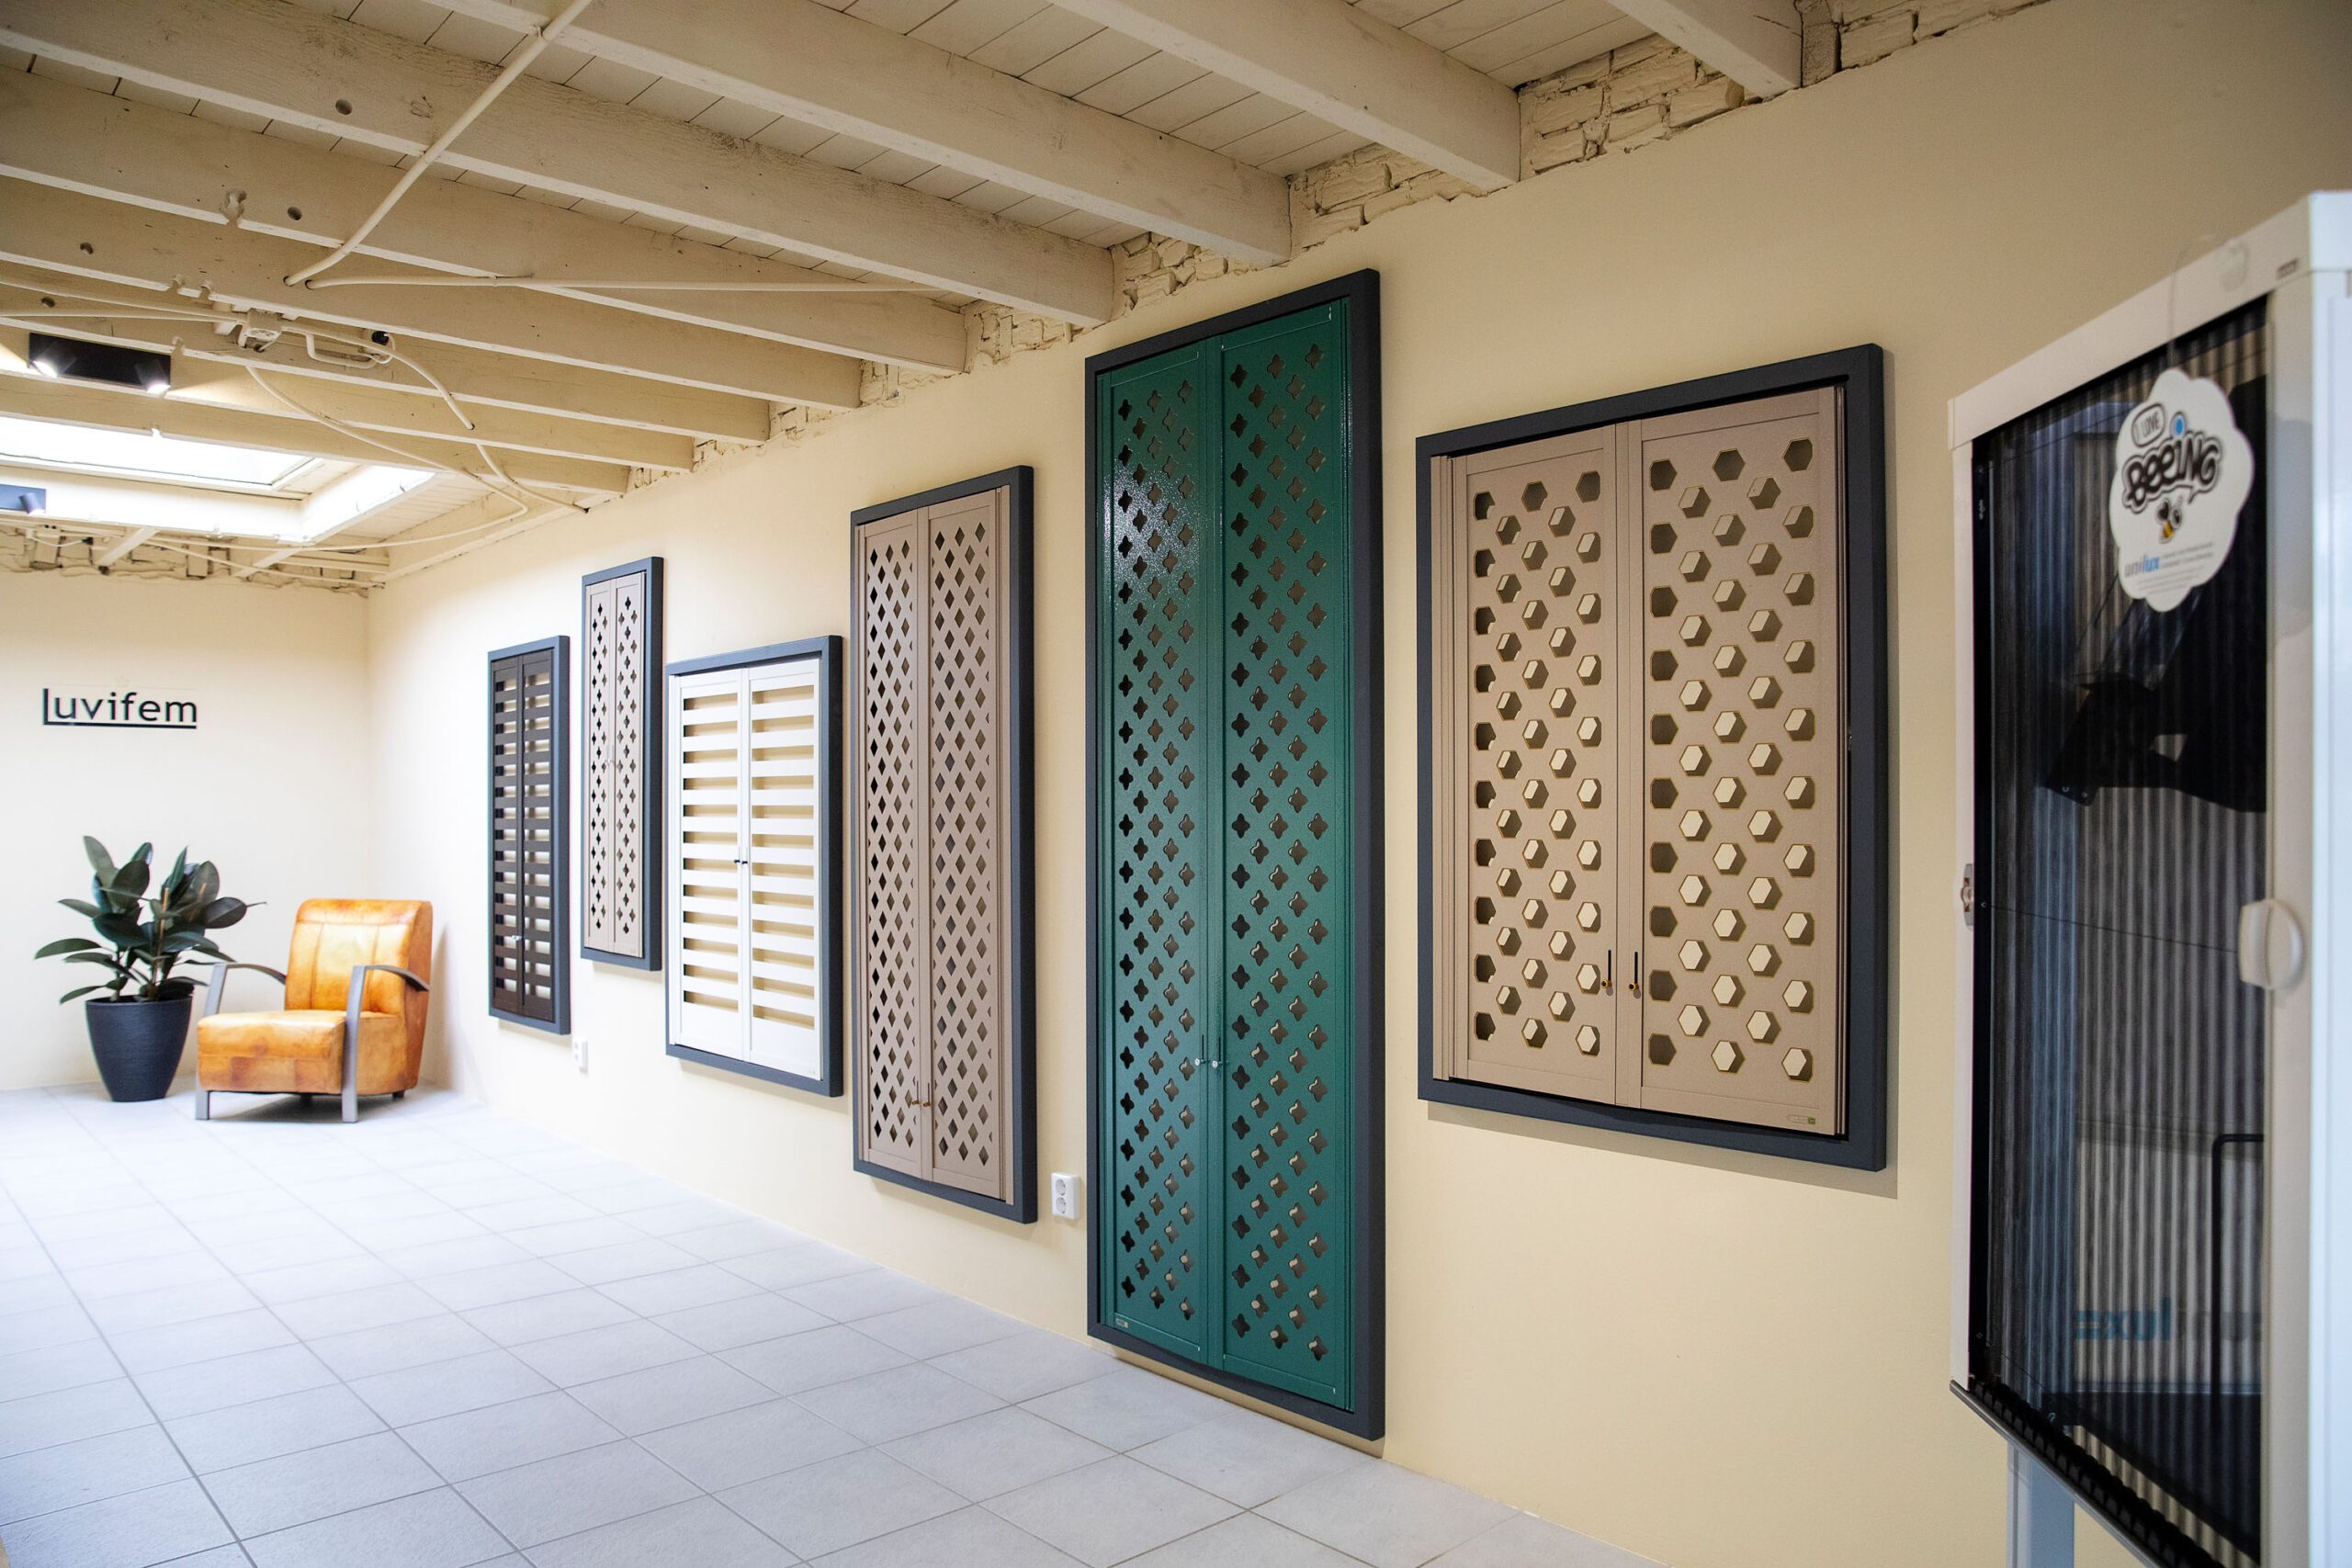 Luvifem te Best is dé specialist in Fractions aluminium shutters